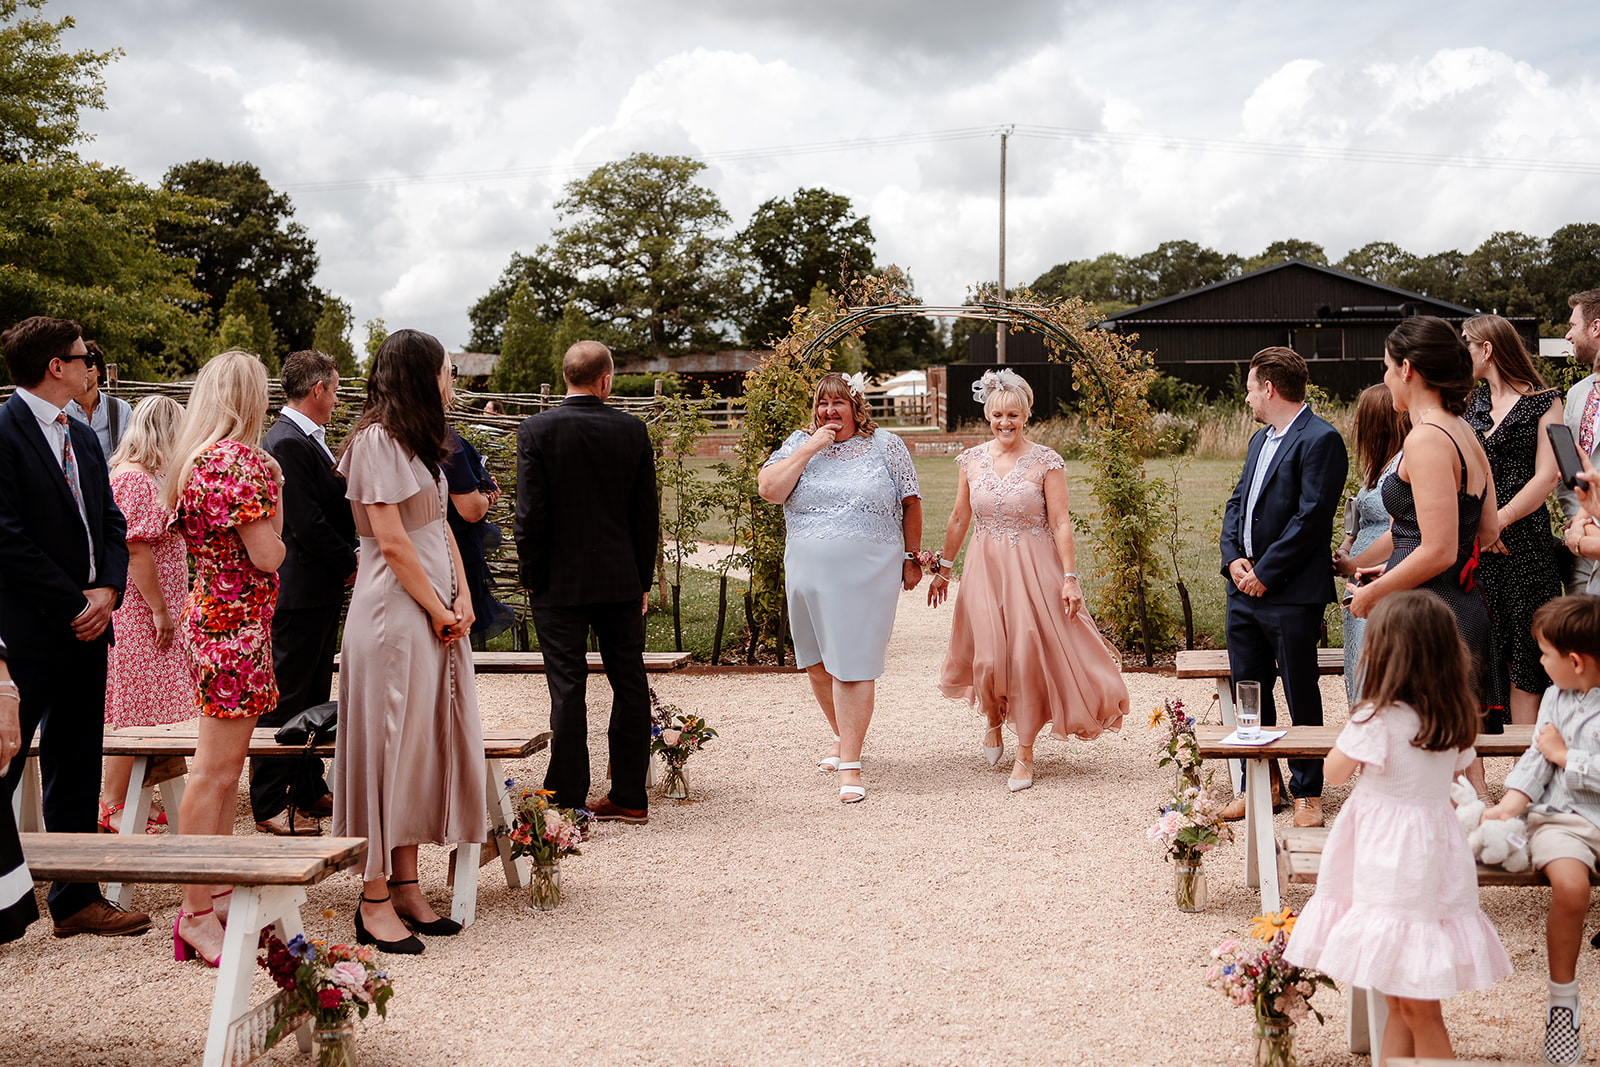 The mothers of the bride and groom walk down the aisle together at a summer wedding at Silchester Farm